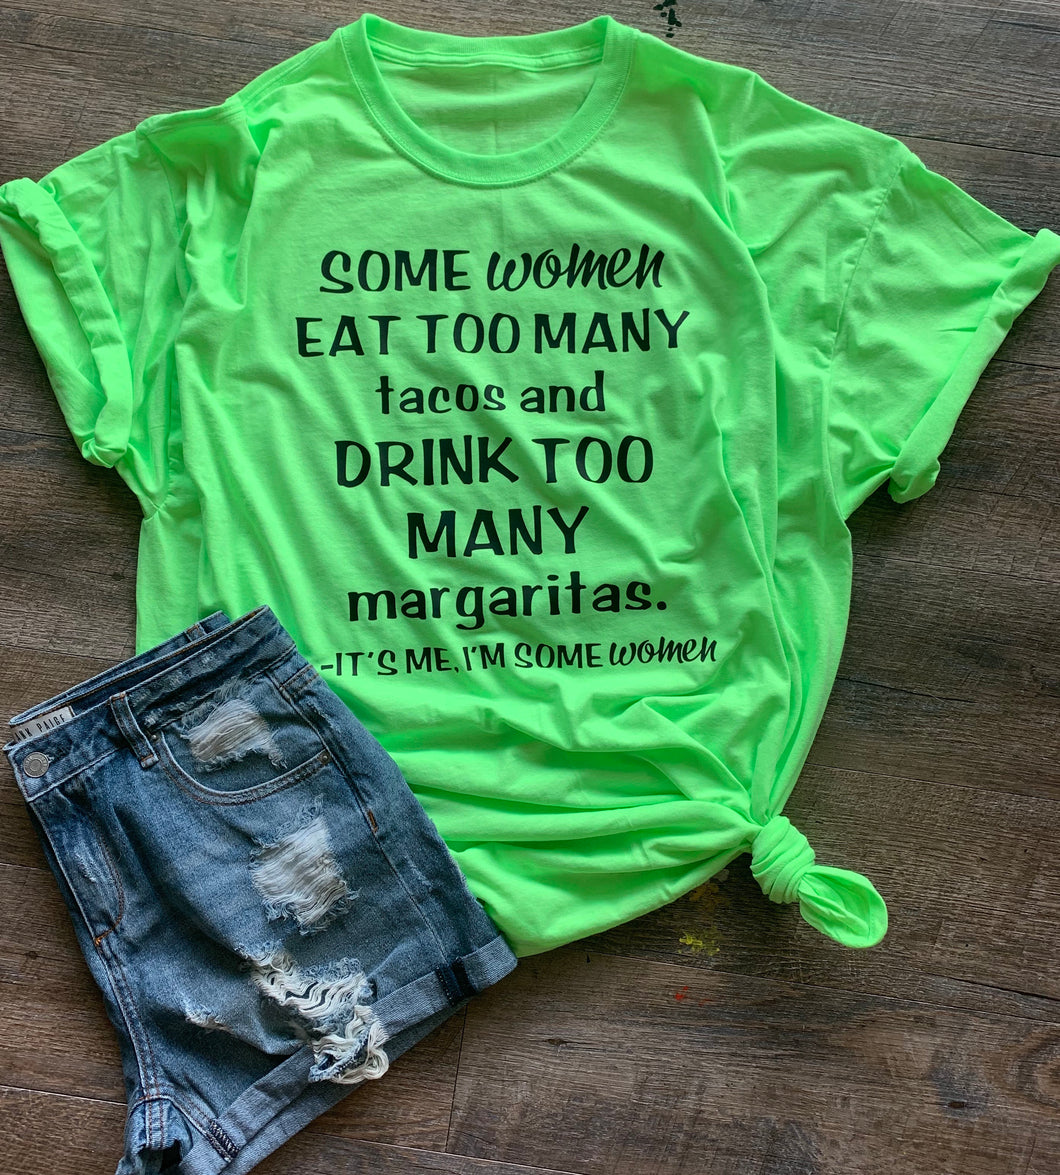 Some women eat too many tacos and drink too many margaritas it’s me I’m some women funny graphic tee - Mavictoria Designs Hot Press Express